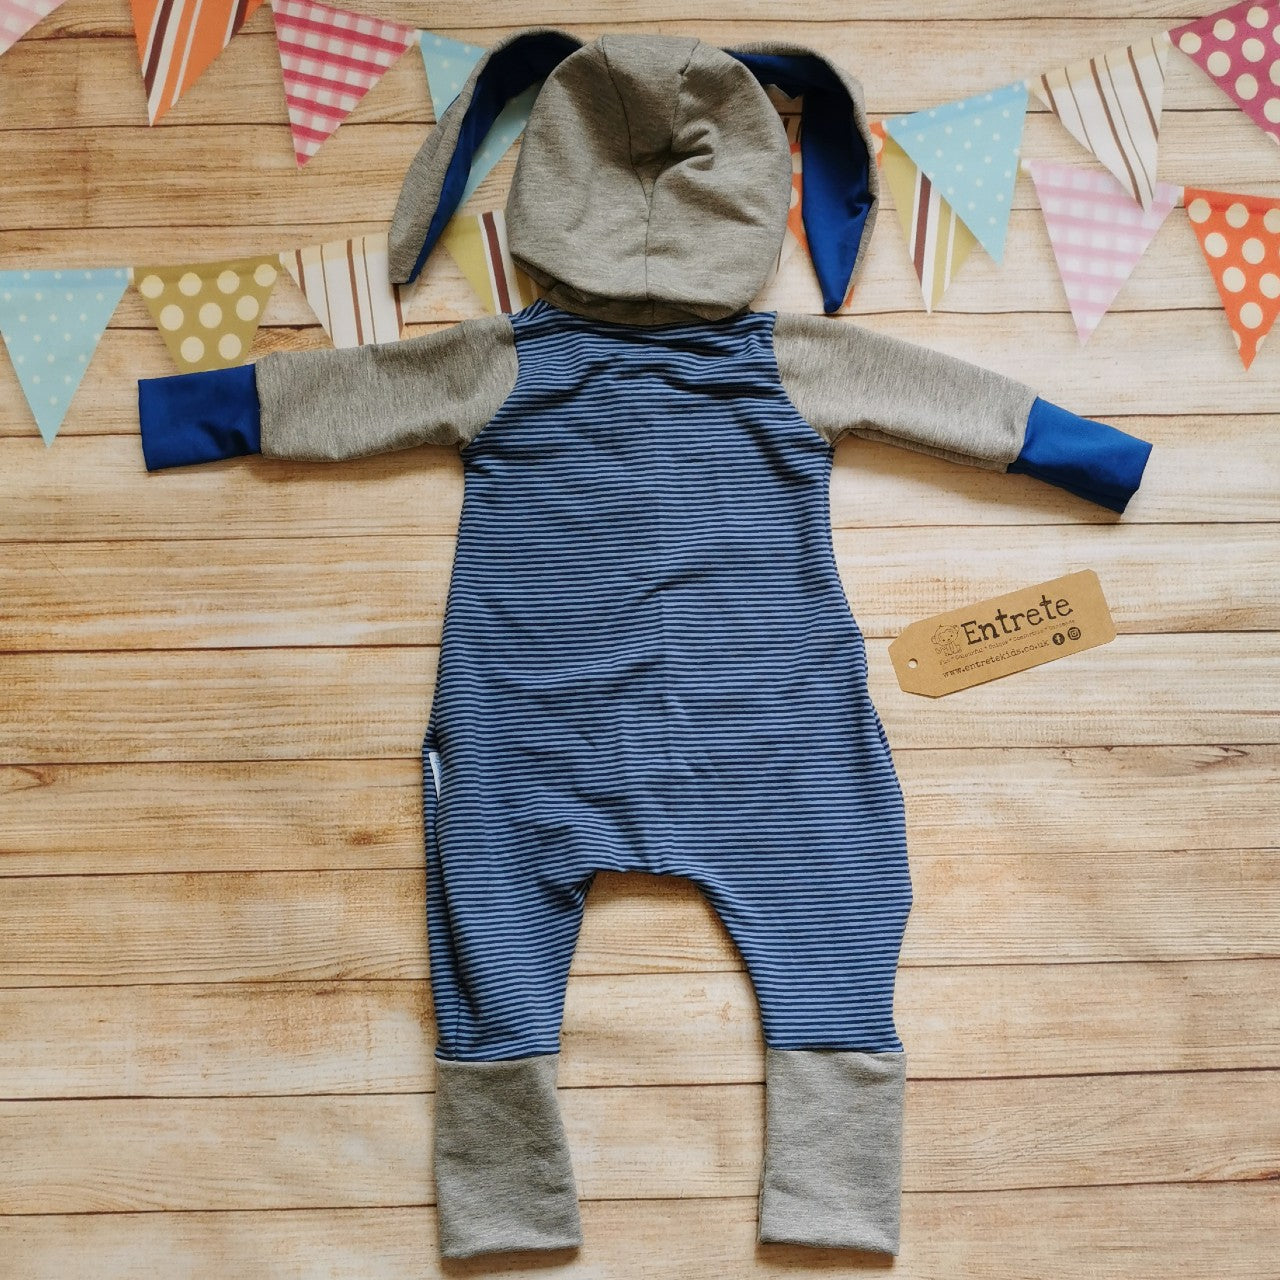 Rear of the warm, comfy and beautifully blue striped bunny romper. Handmade using cotton French terry, cotton sweat fabric and cotton jersey.